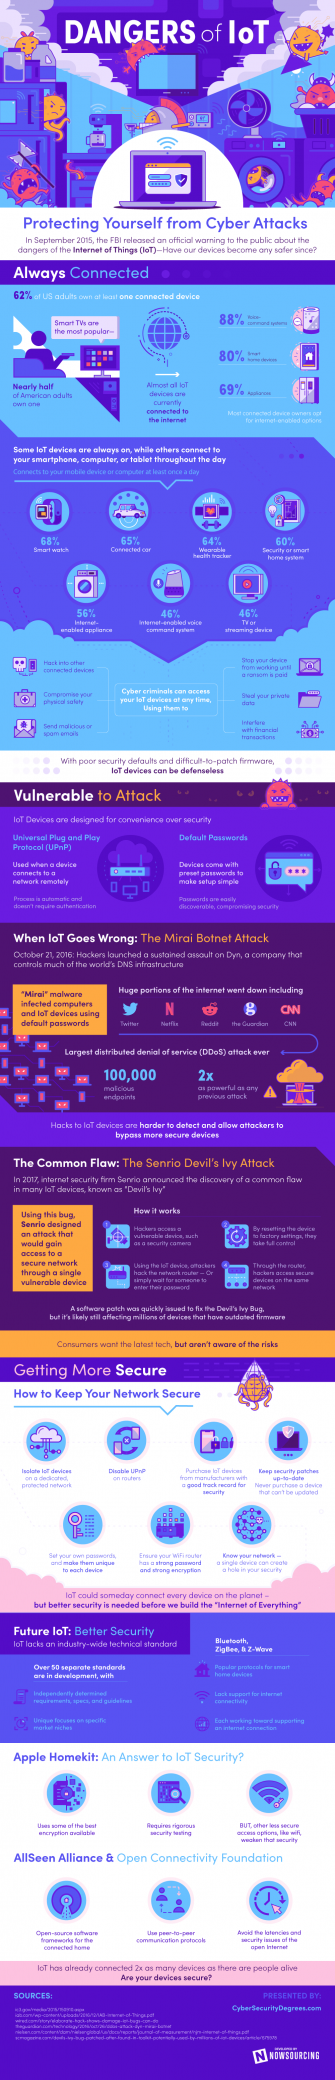 Why Have IoT Security Warnings Gone Unheeded? [Infographic]